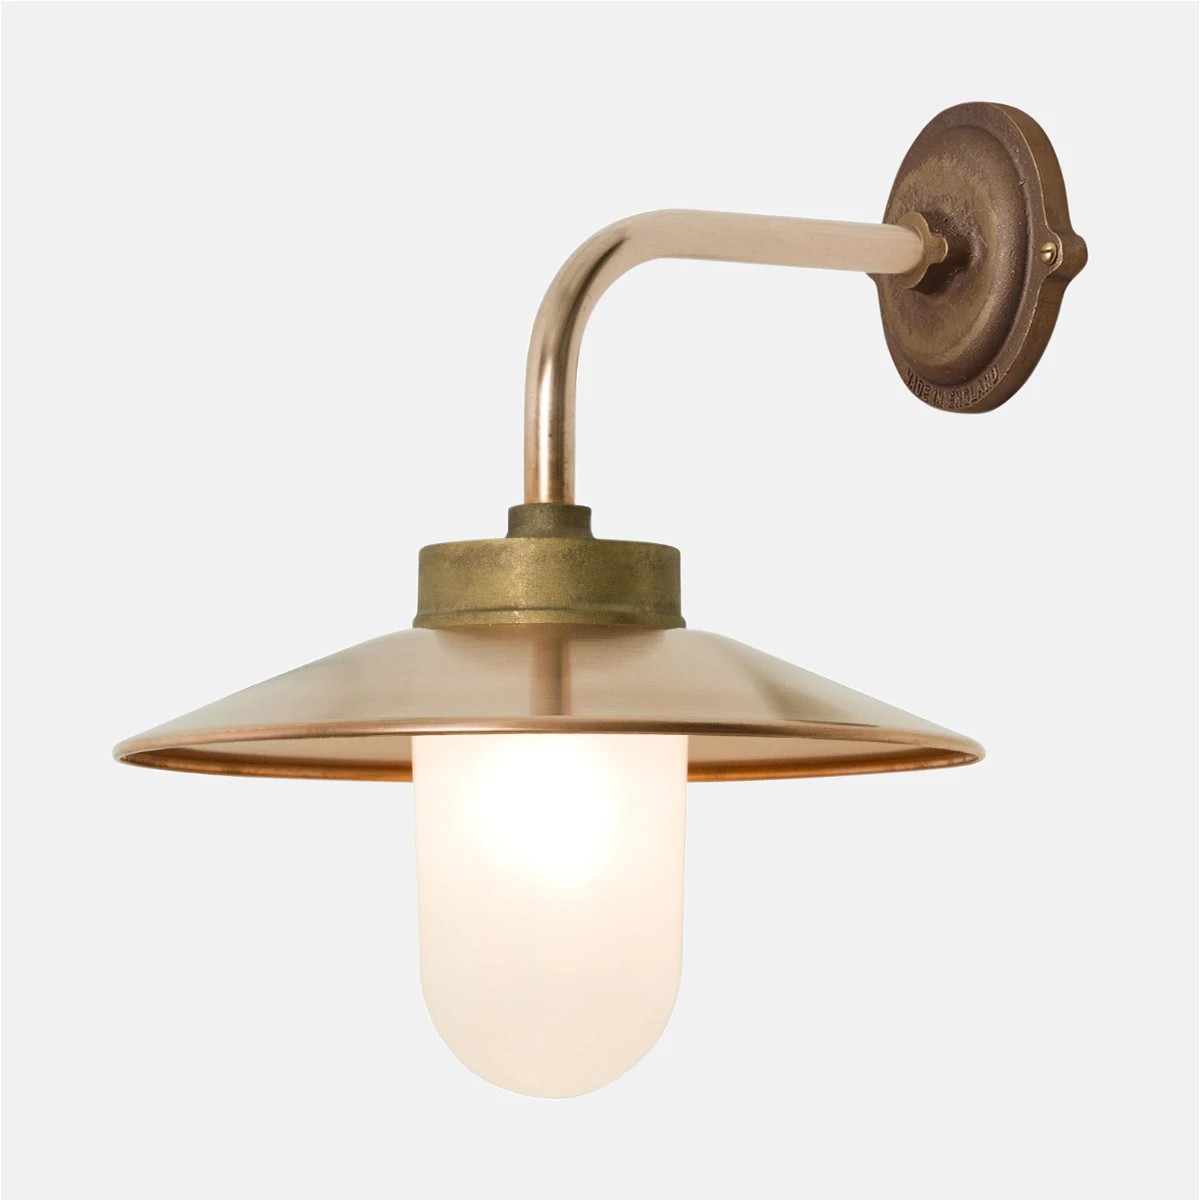 a brass wall light with a white glass shade